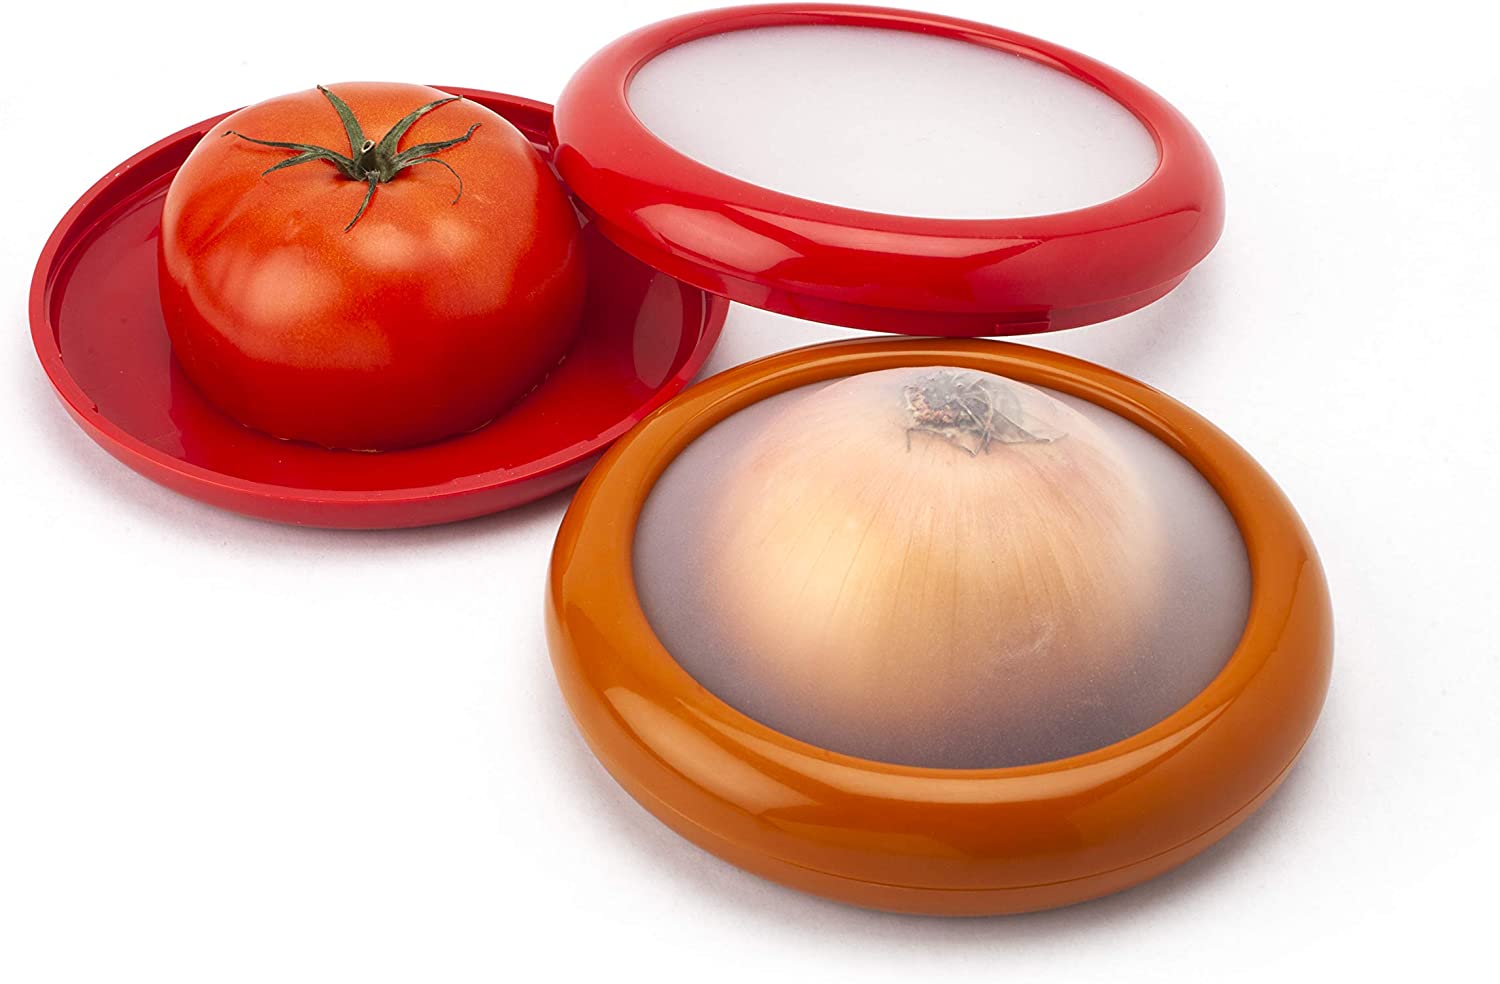 Half an onion and half a tomato are in seperate onion pod savers showing that other vegetables can be stored in it as well.